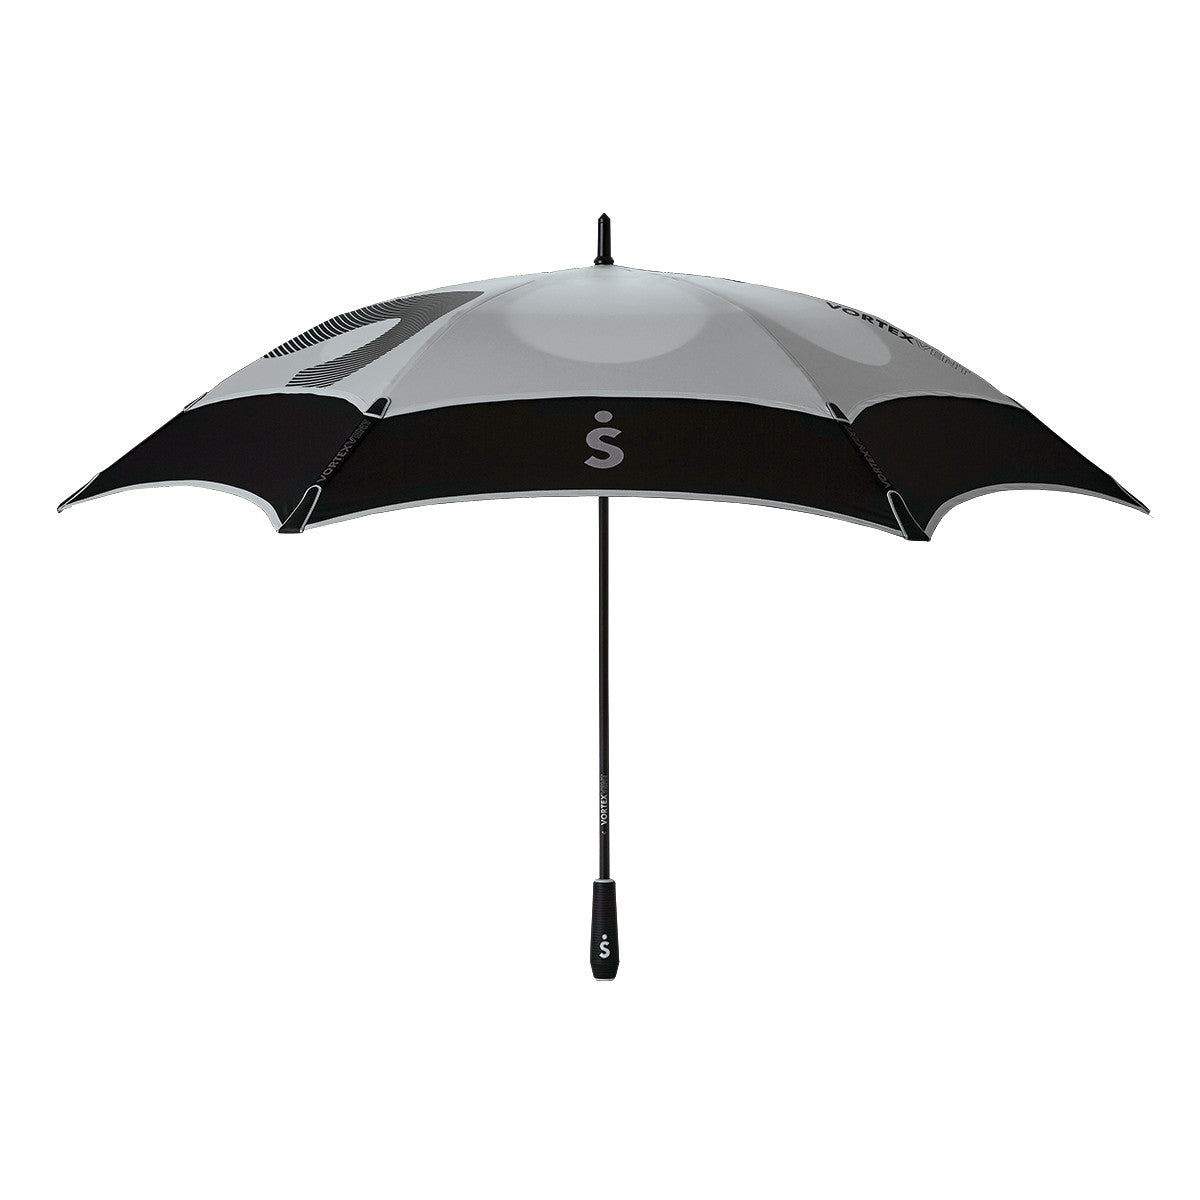 Light grey and black vented double canopy wind-resistant three person golf umbrella with fiberglass frame and rubber grip, viewed straight on